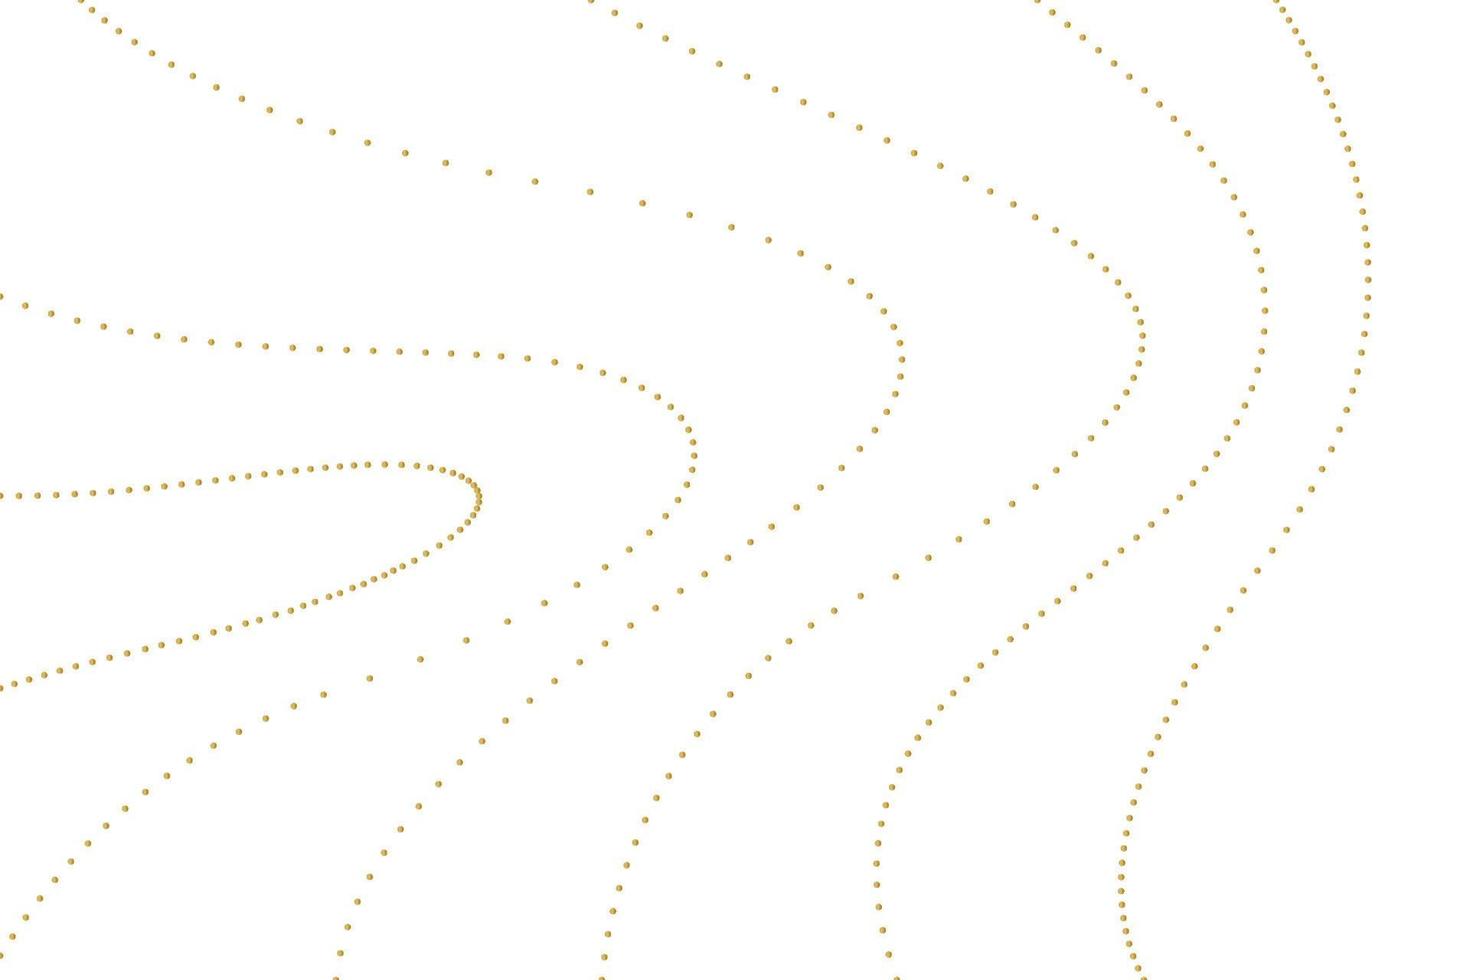 Background with curved design with moving gold dots on the white background. vector illustration